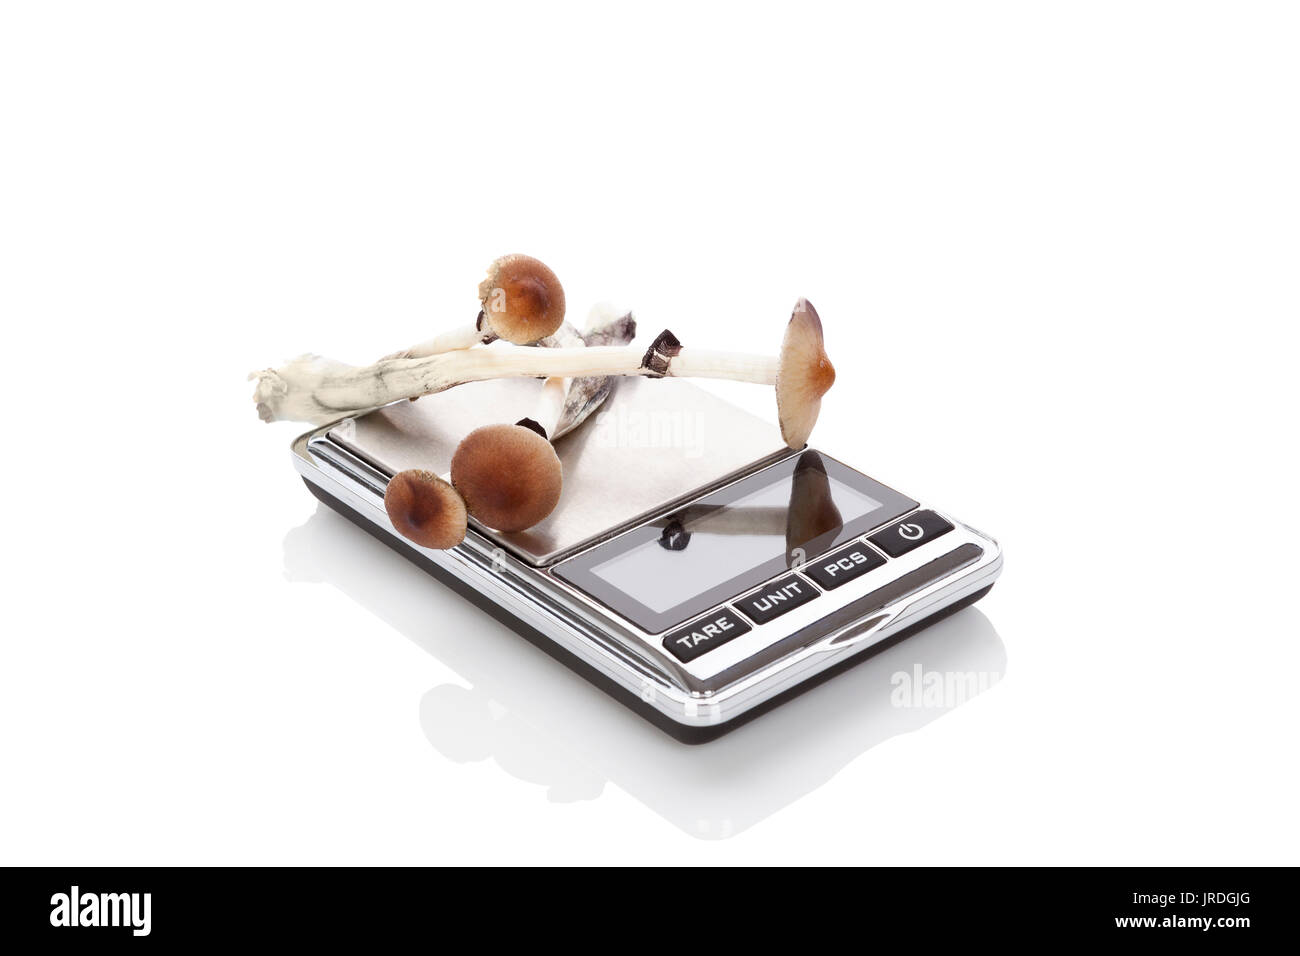 Magic mushrooms on digital scale isolated on white background. Psychedelic medicine. Natural remedy. Stock Photo